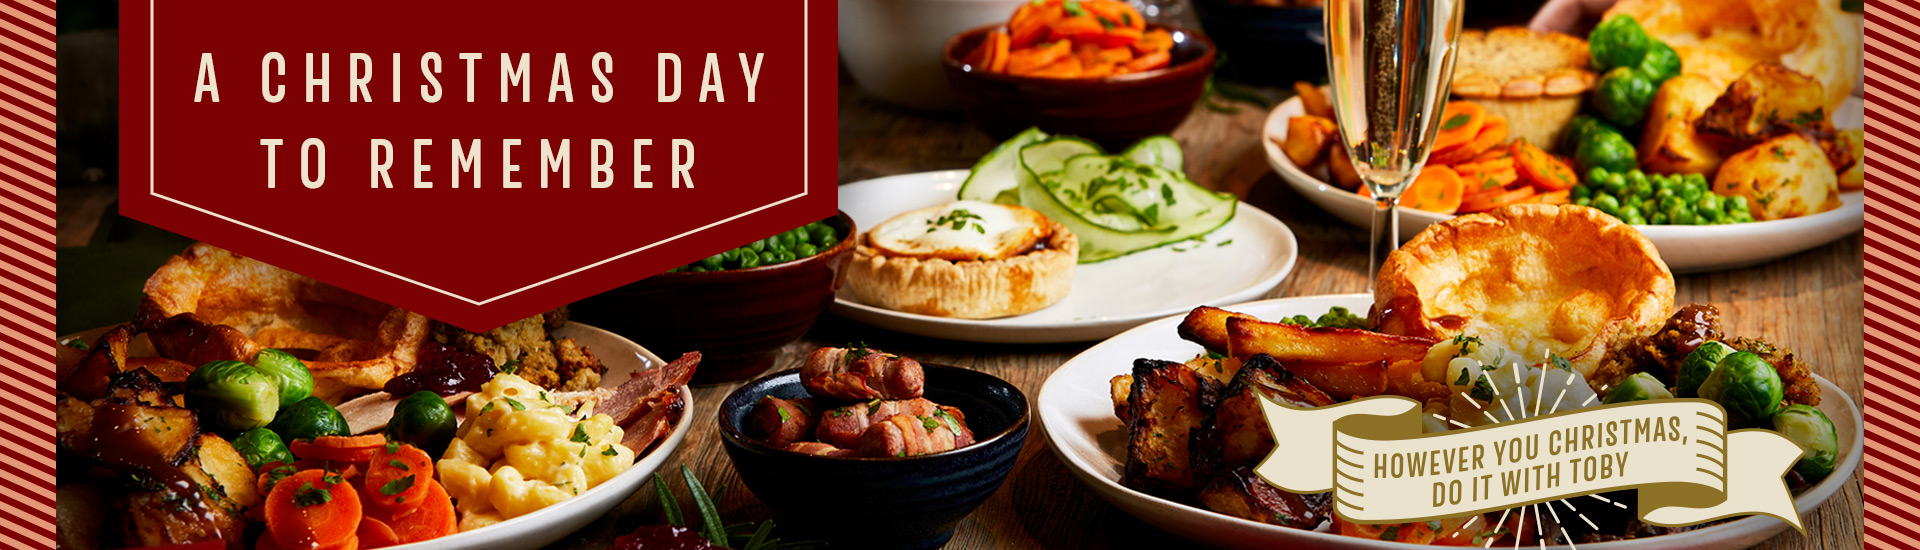 Christmas Day menu at Toby Carvery Langley Slough